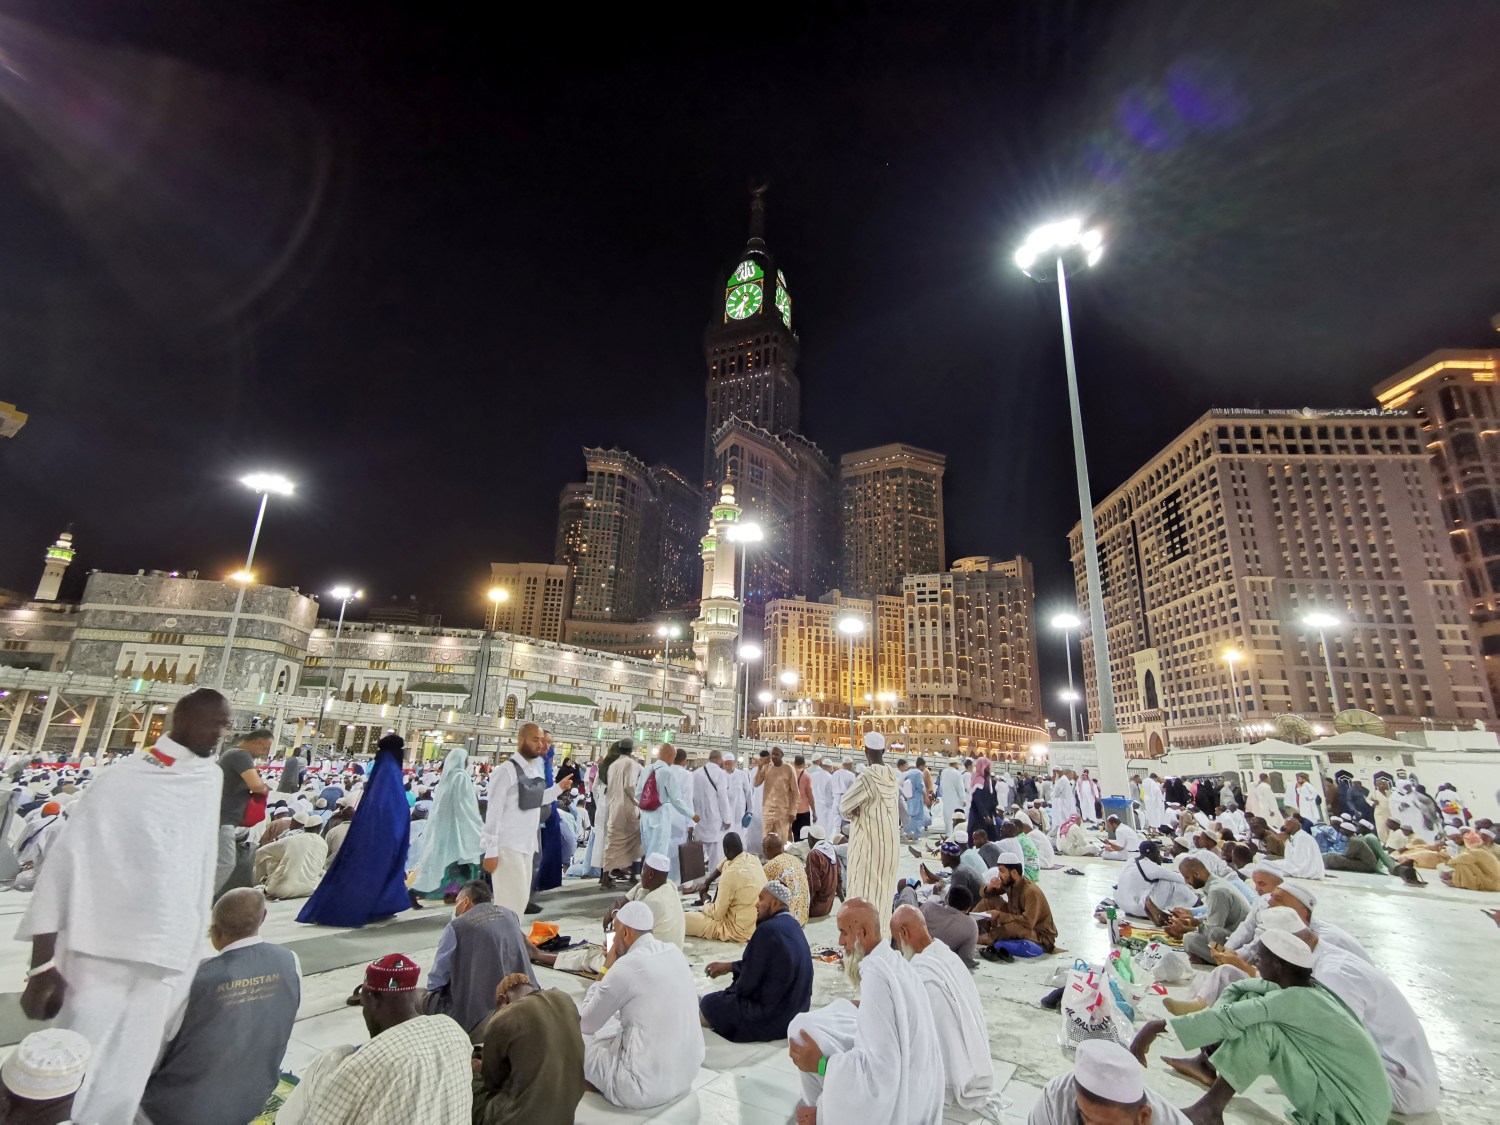 Muslims pray at the Grand Mosque during the annual Hajj pilgrimage in their holy city of Mecca, Saudi Arabia August 8, 2019. REUTERS/Waleed Ali